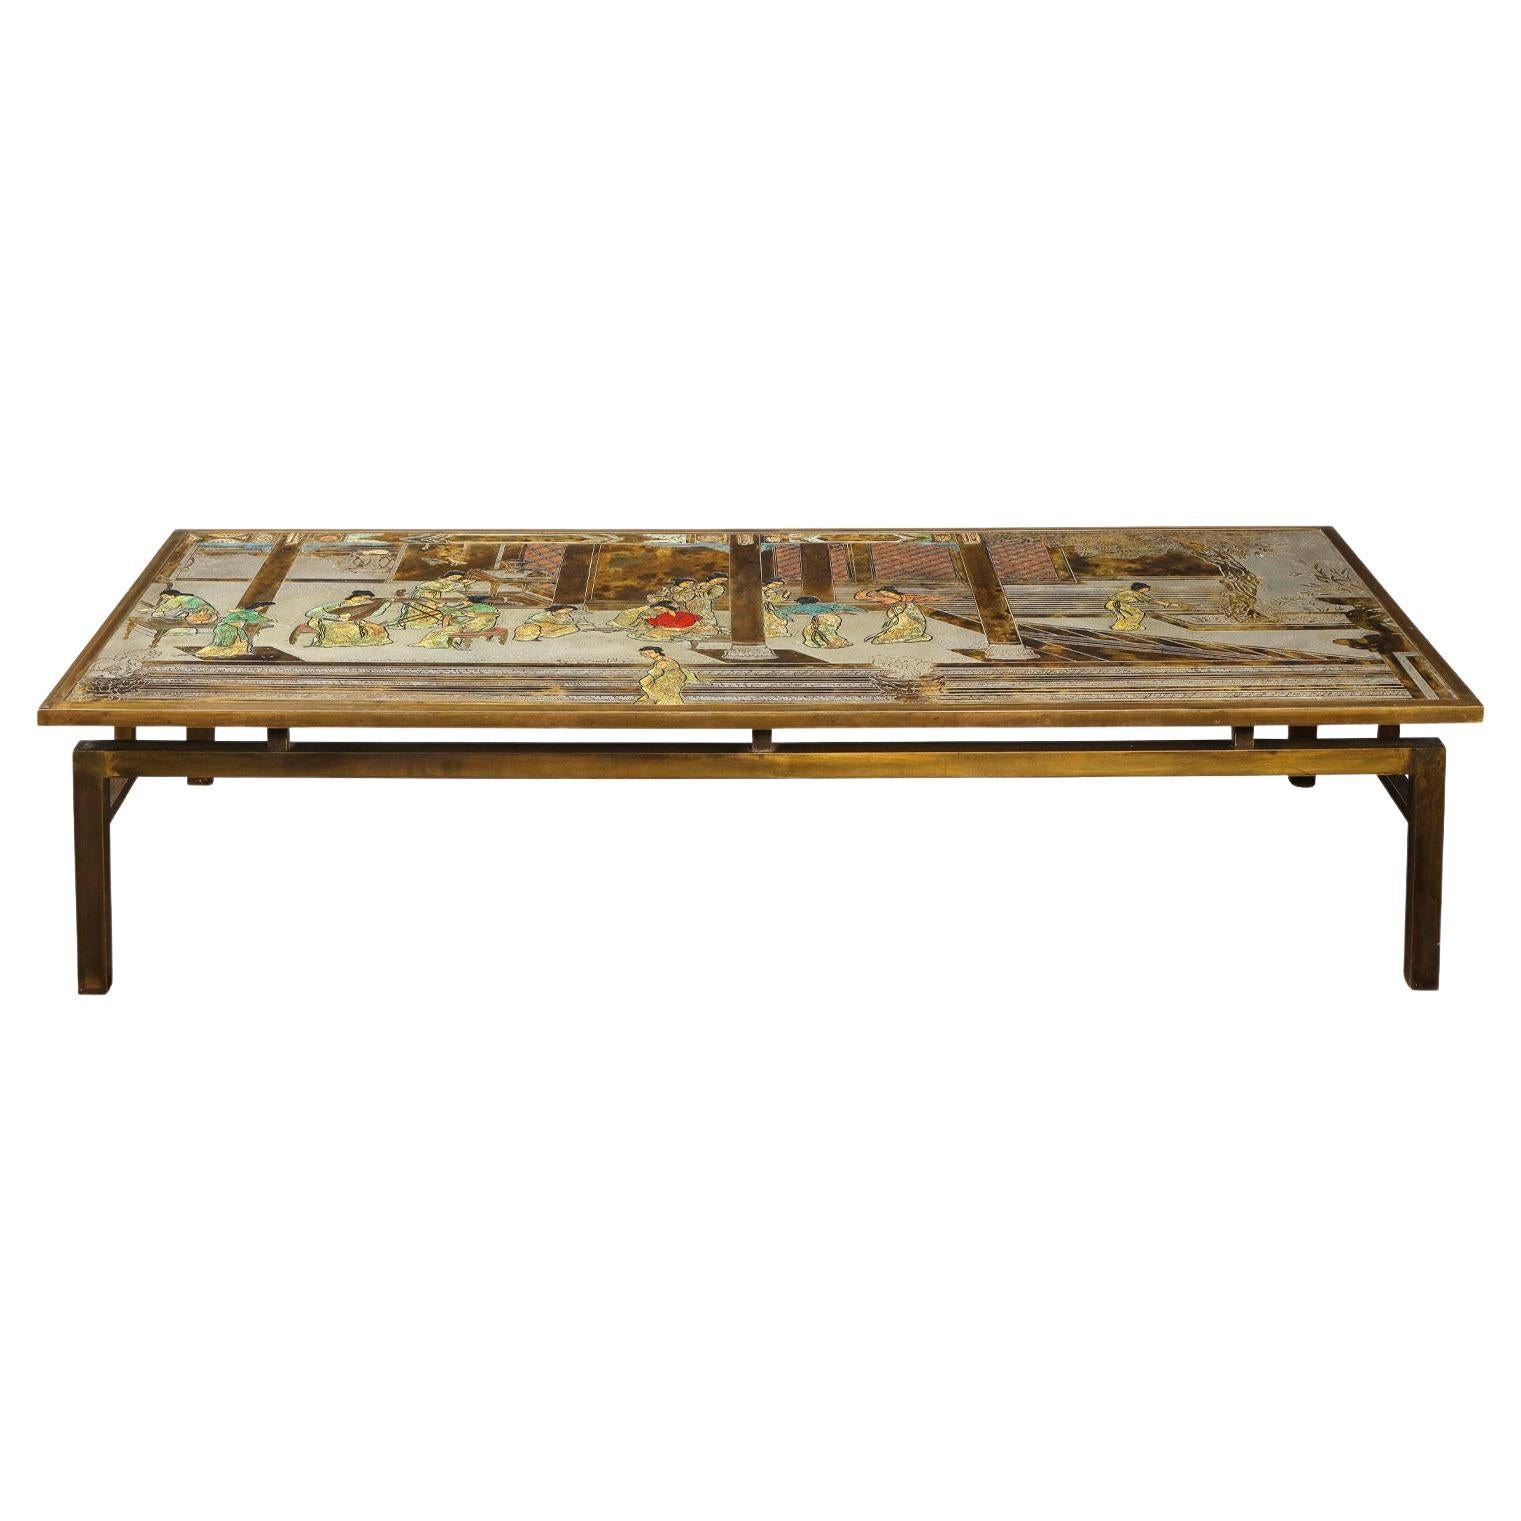 Philip & Kelvin LaVerne Large "Chin Ying" Coffee Table 1960s 'Signed'